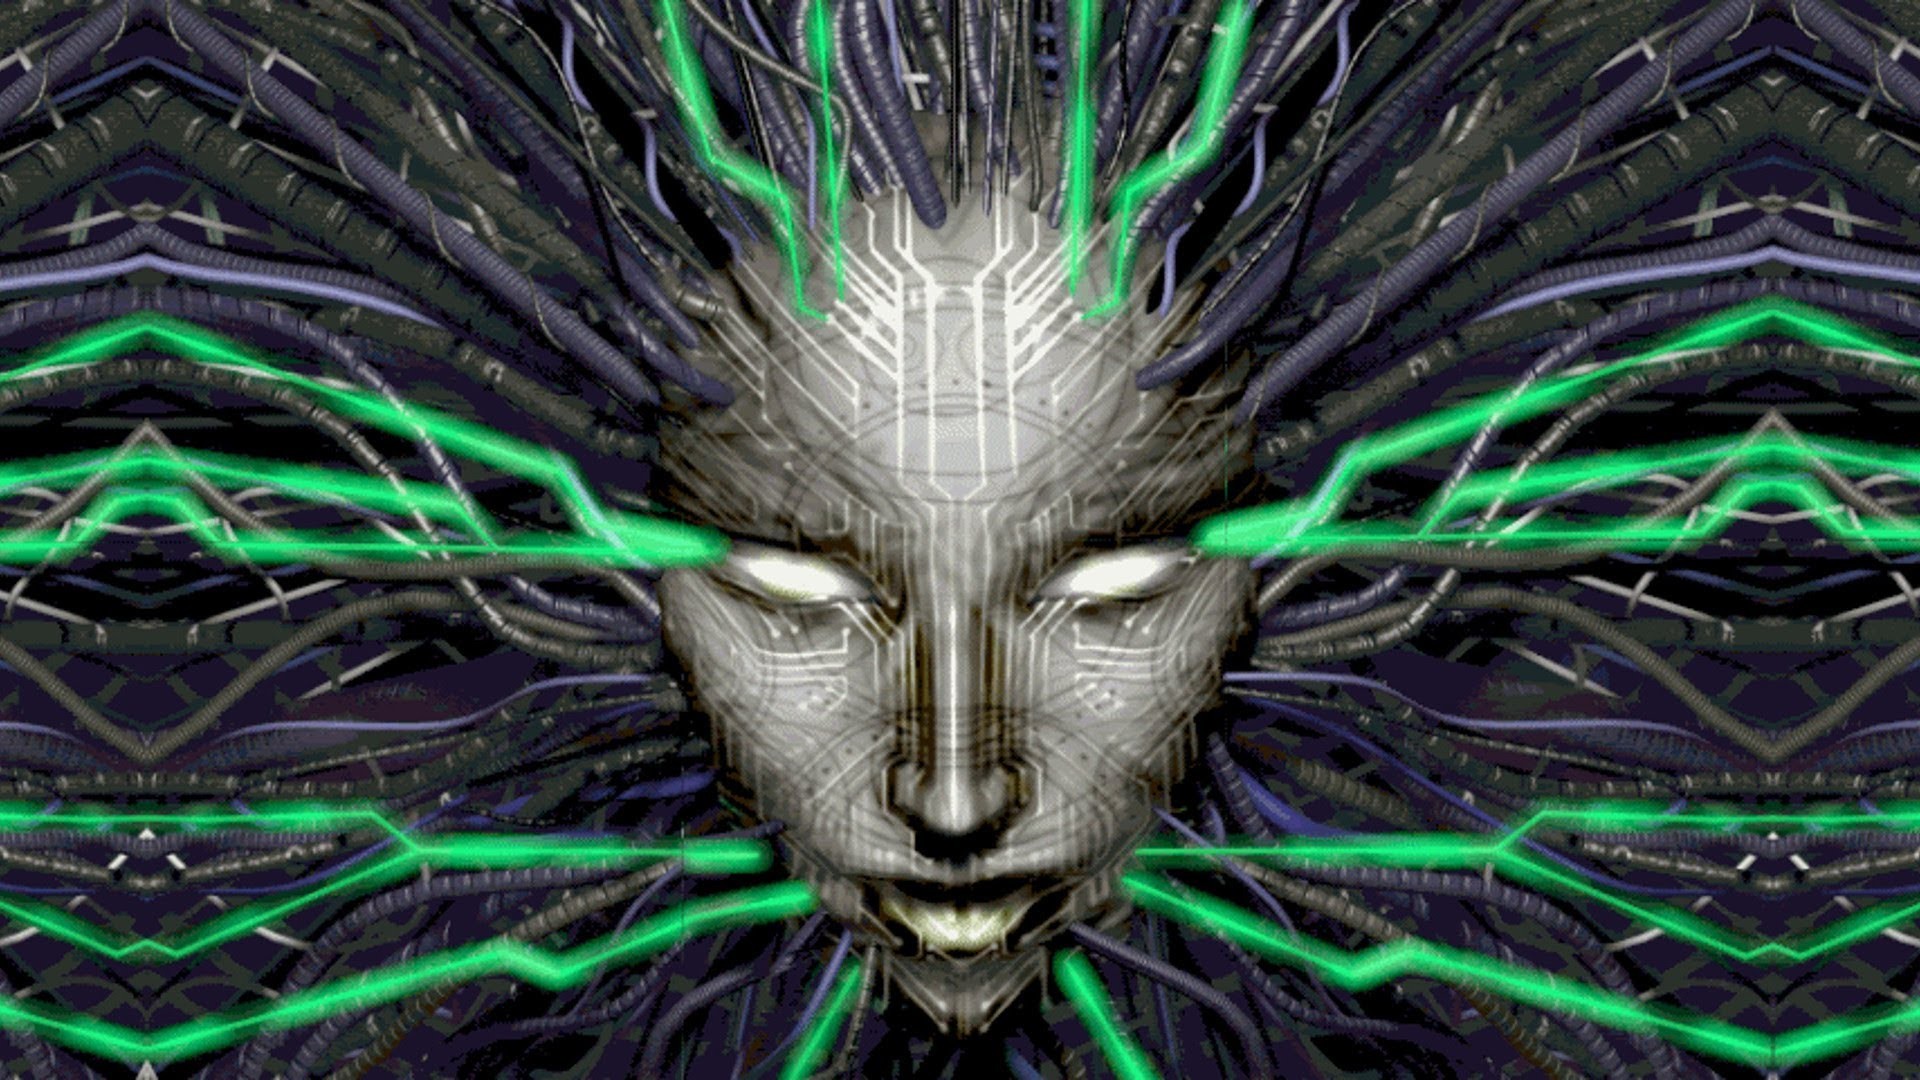 System shock wallpaper pictures